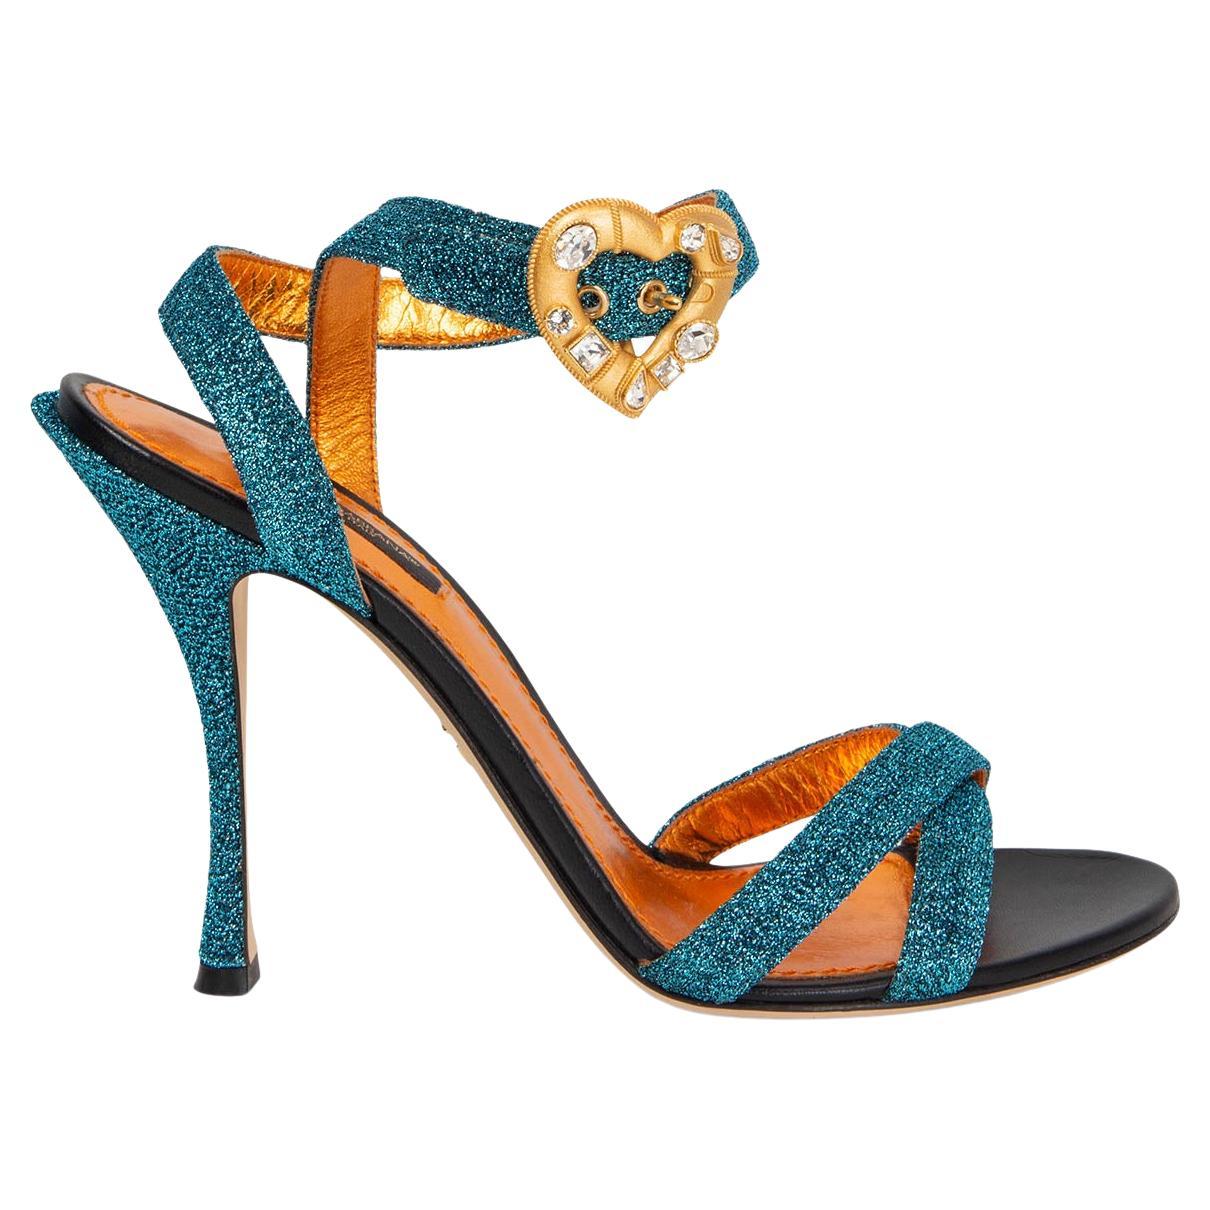 Dolce & Gabbana Sandals for Girls sale - discounted price | FASHIOLA INDIA